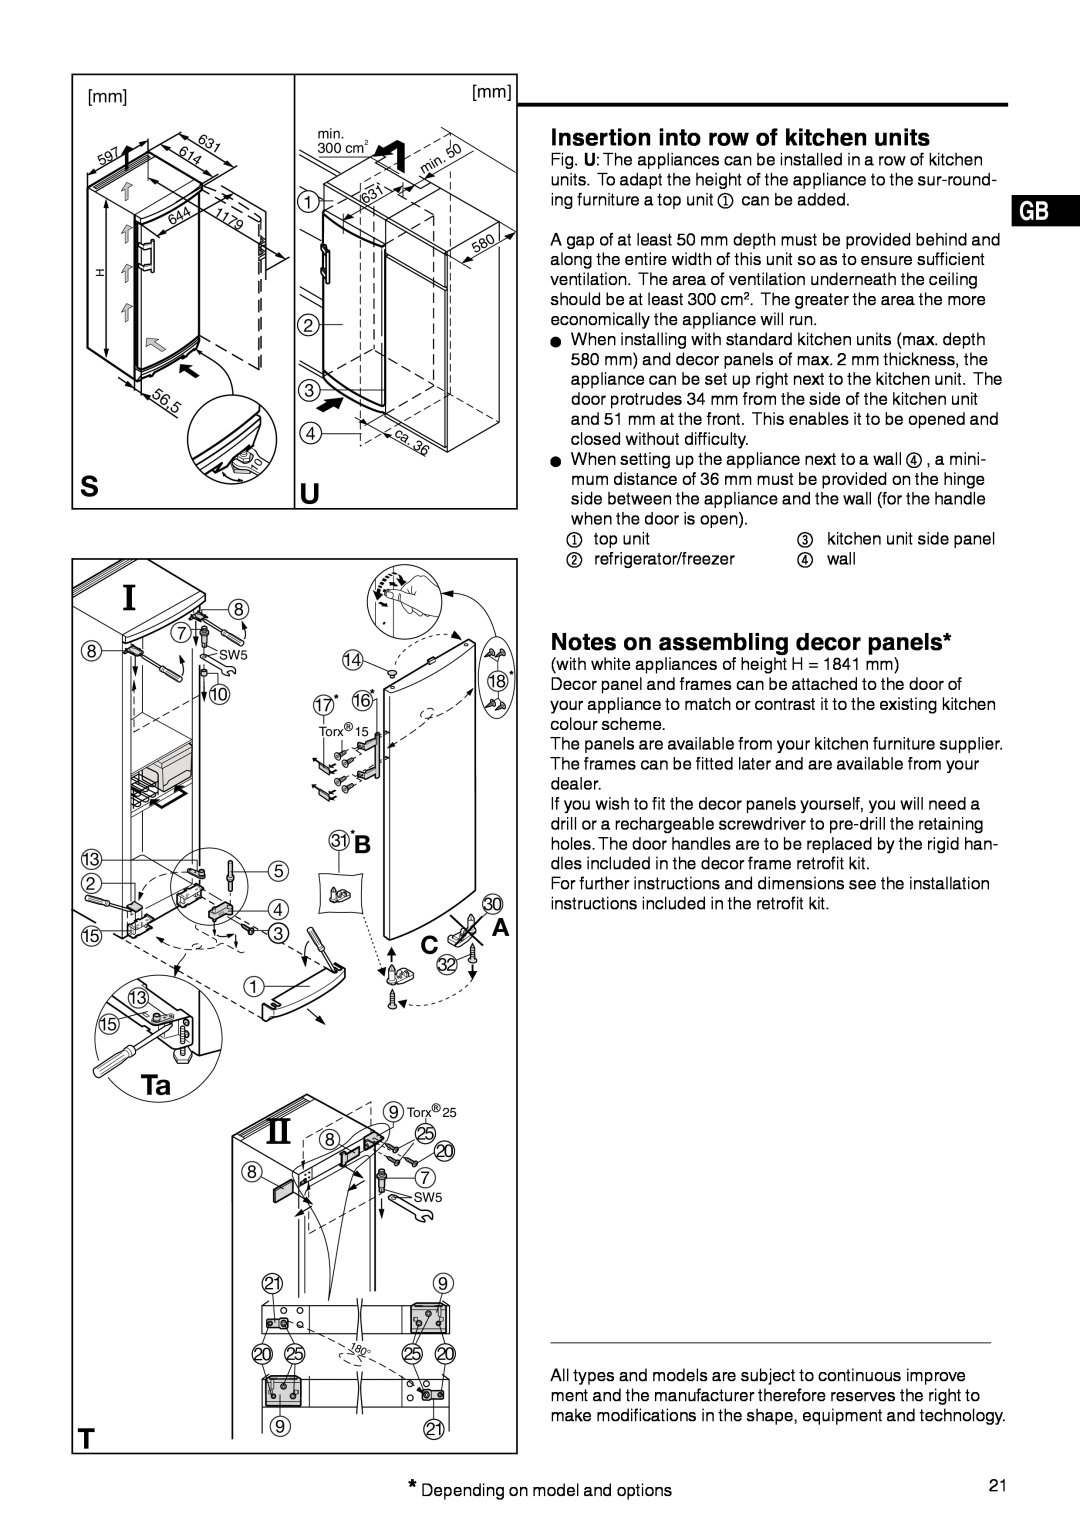 Liebherr 7082 212-02 manual Insertion into row of kitchen units, Notes on assembling decor panels, 1179 